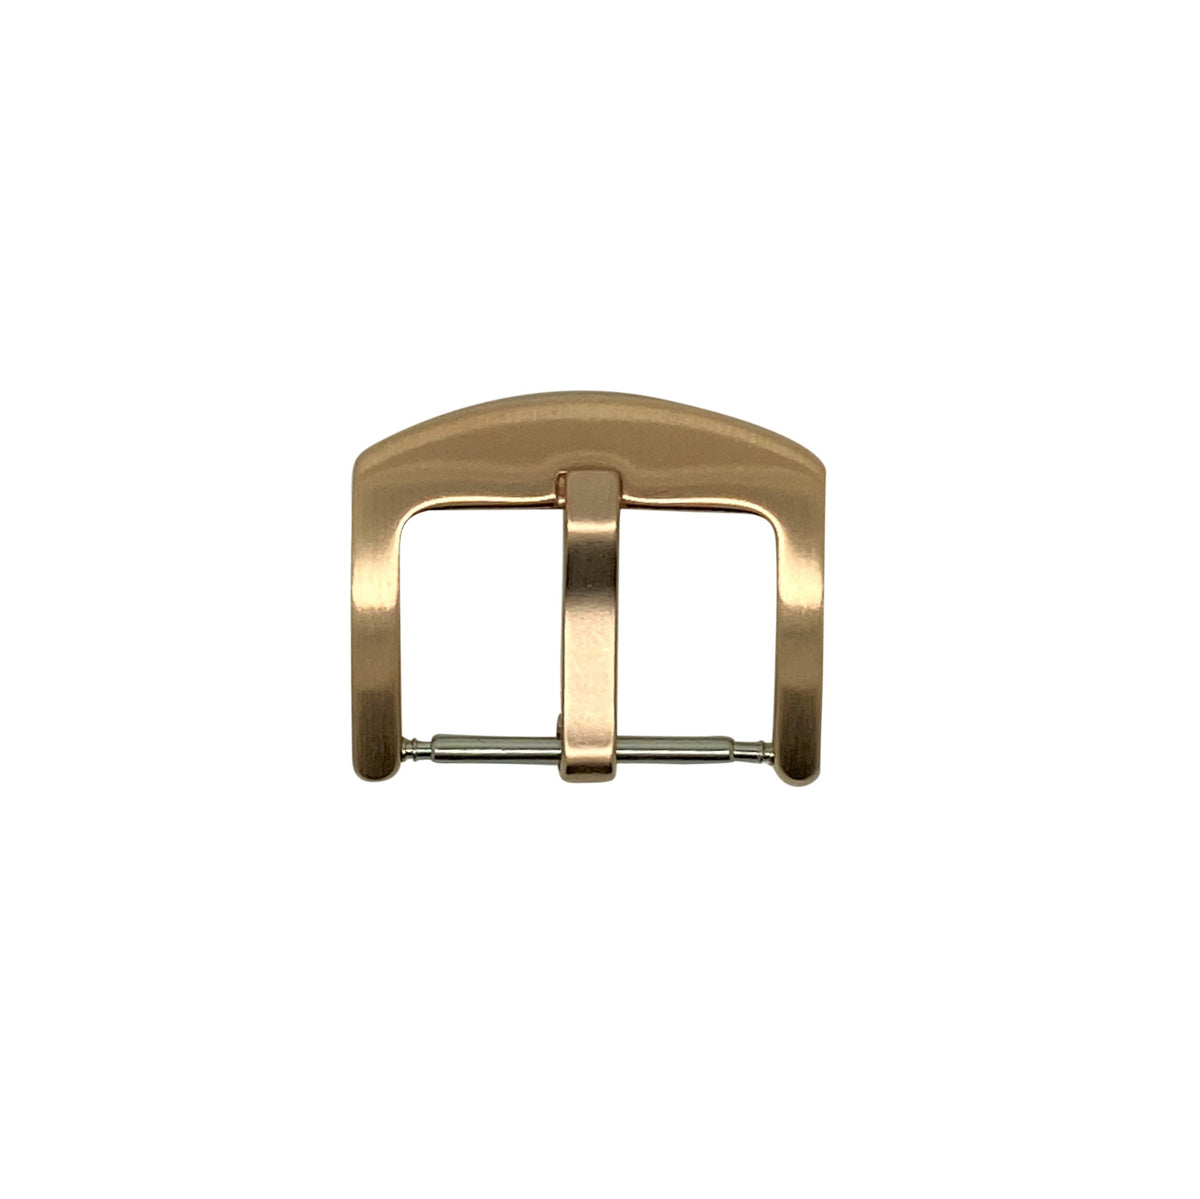 Thumbnail Buckle in Rose Gold (20mm) - Nomad watch Works